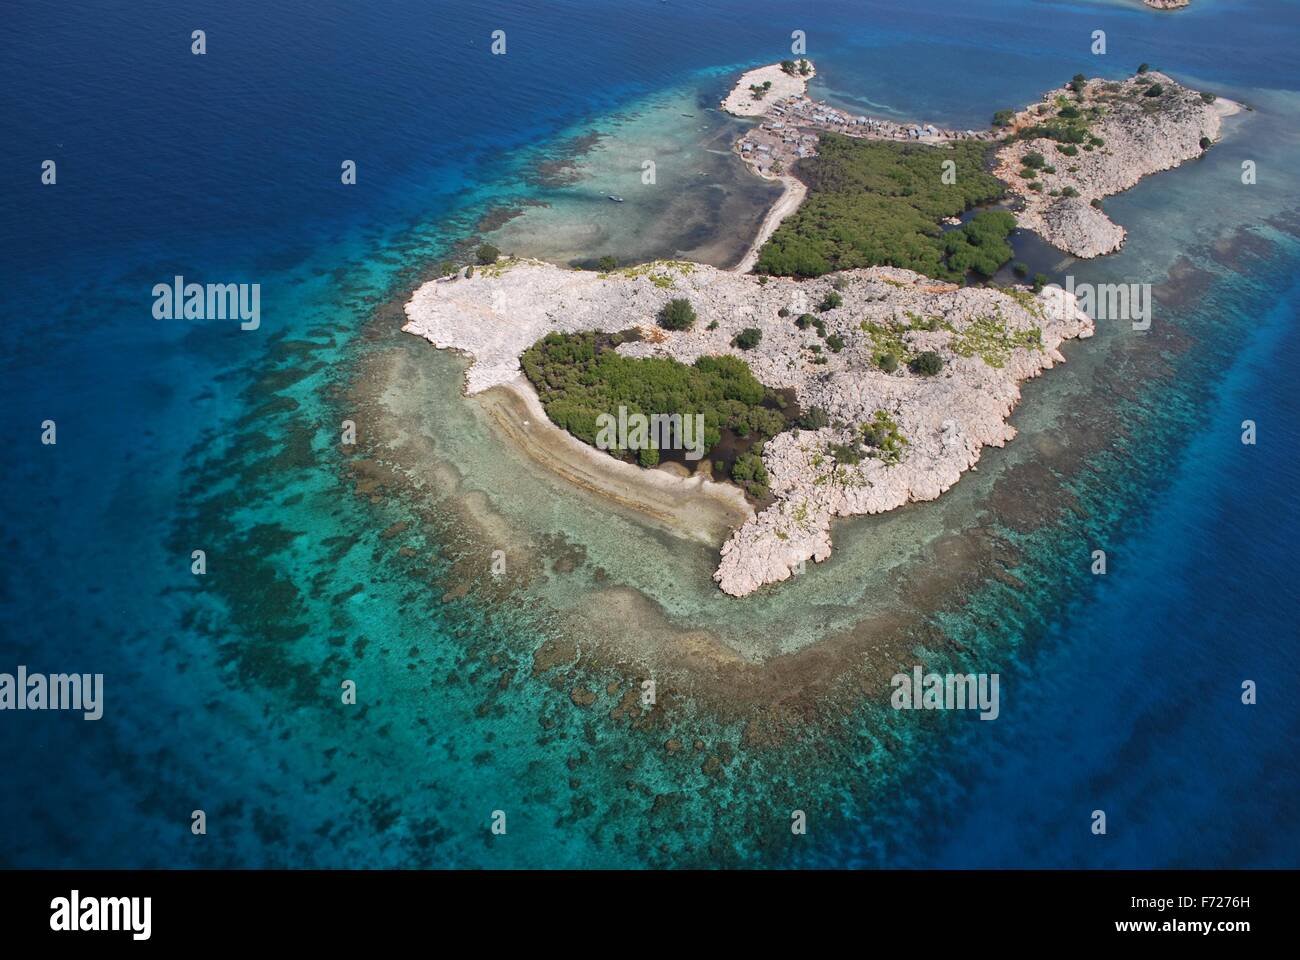 Aerial view of corals reefs and mangroves along the coast of Ti-Gonave Island, Haiti. Stock Photo